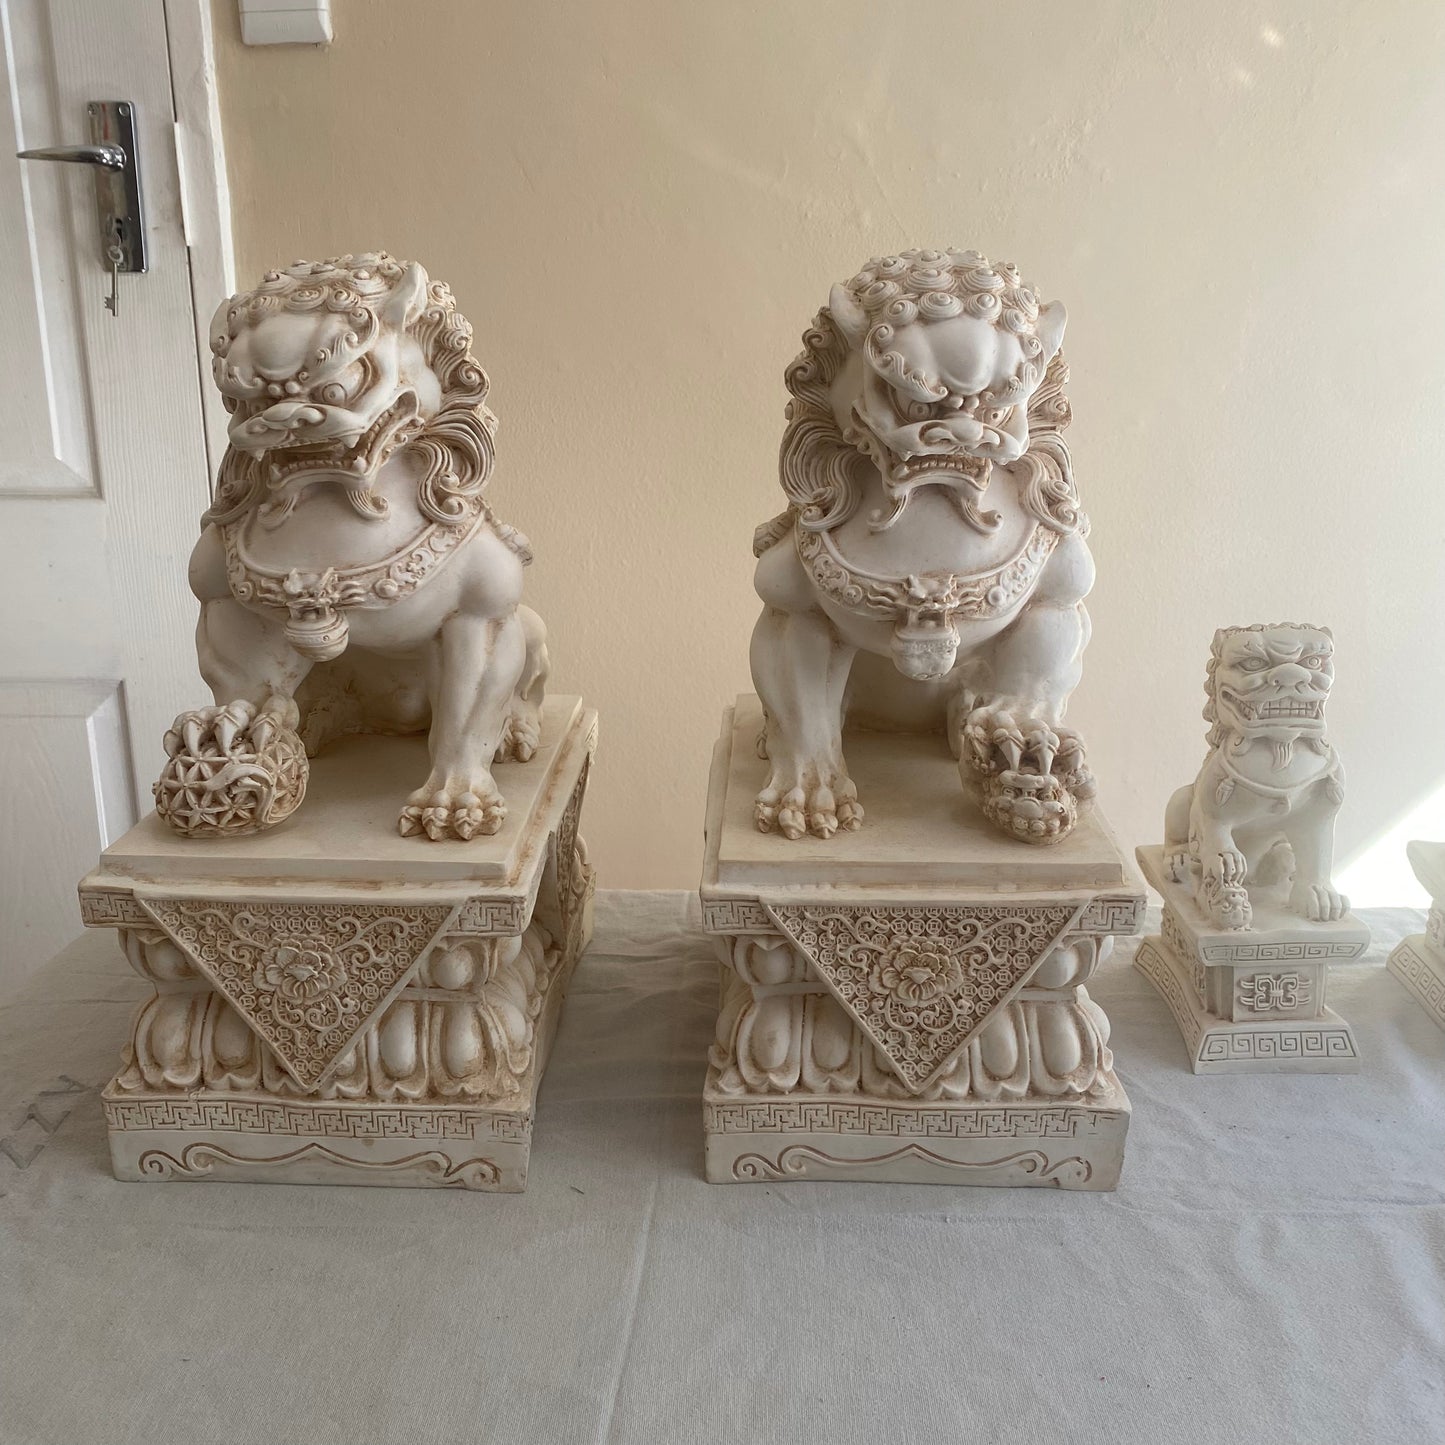 Extra Large Fengshui Foo Dogs Statue - 43cm